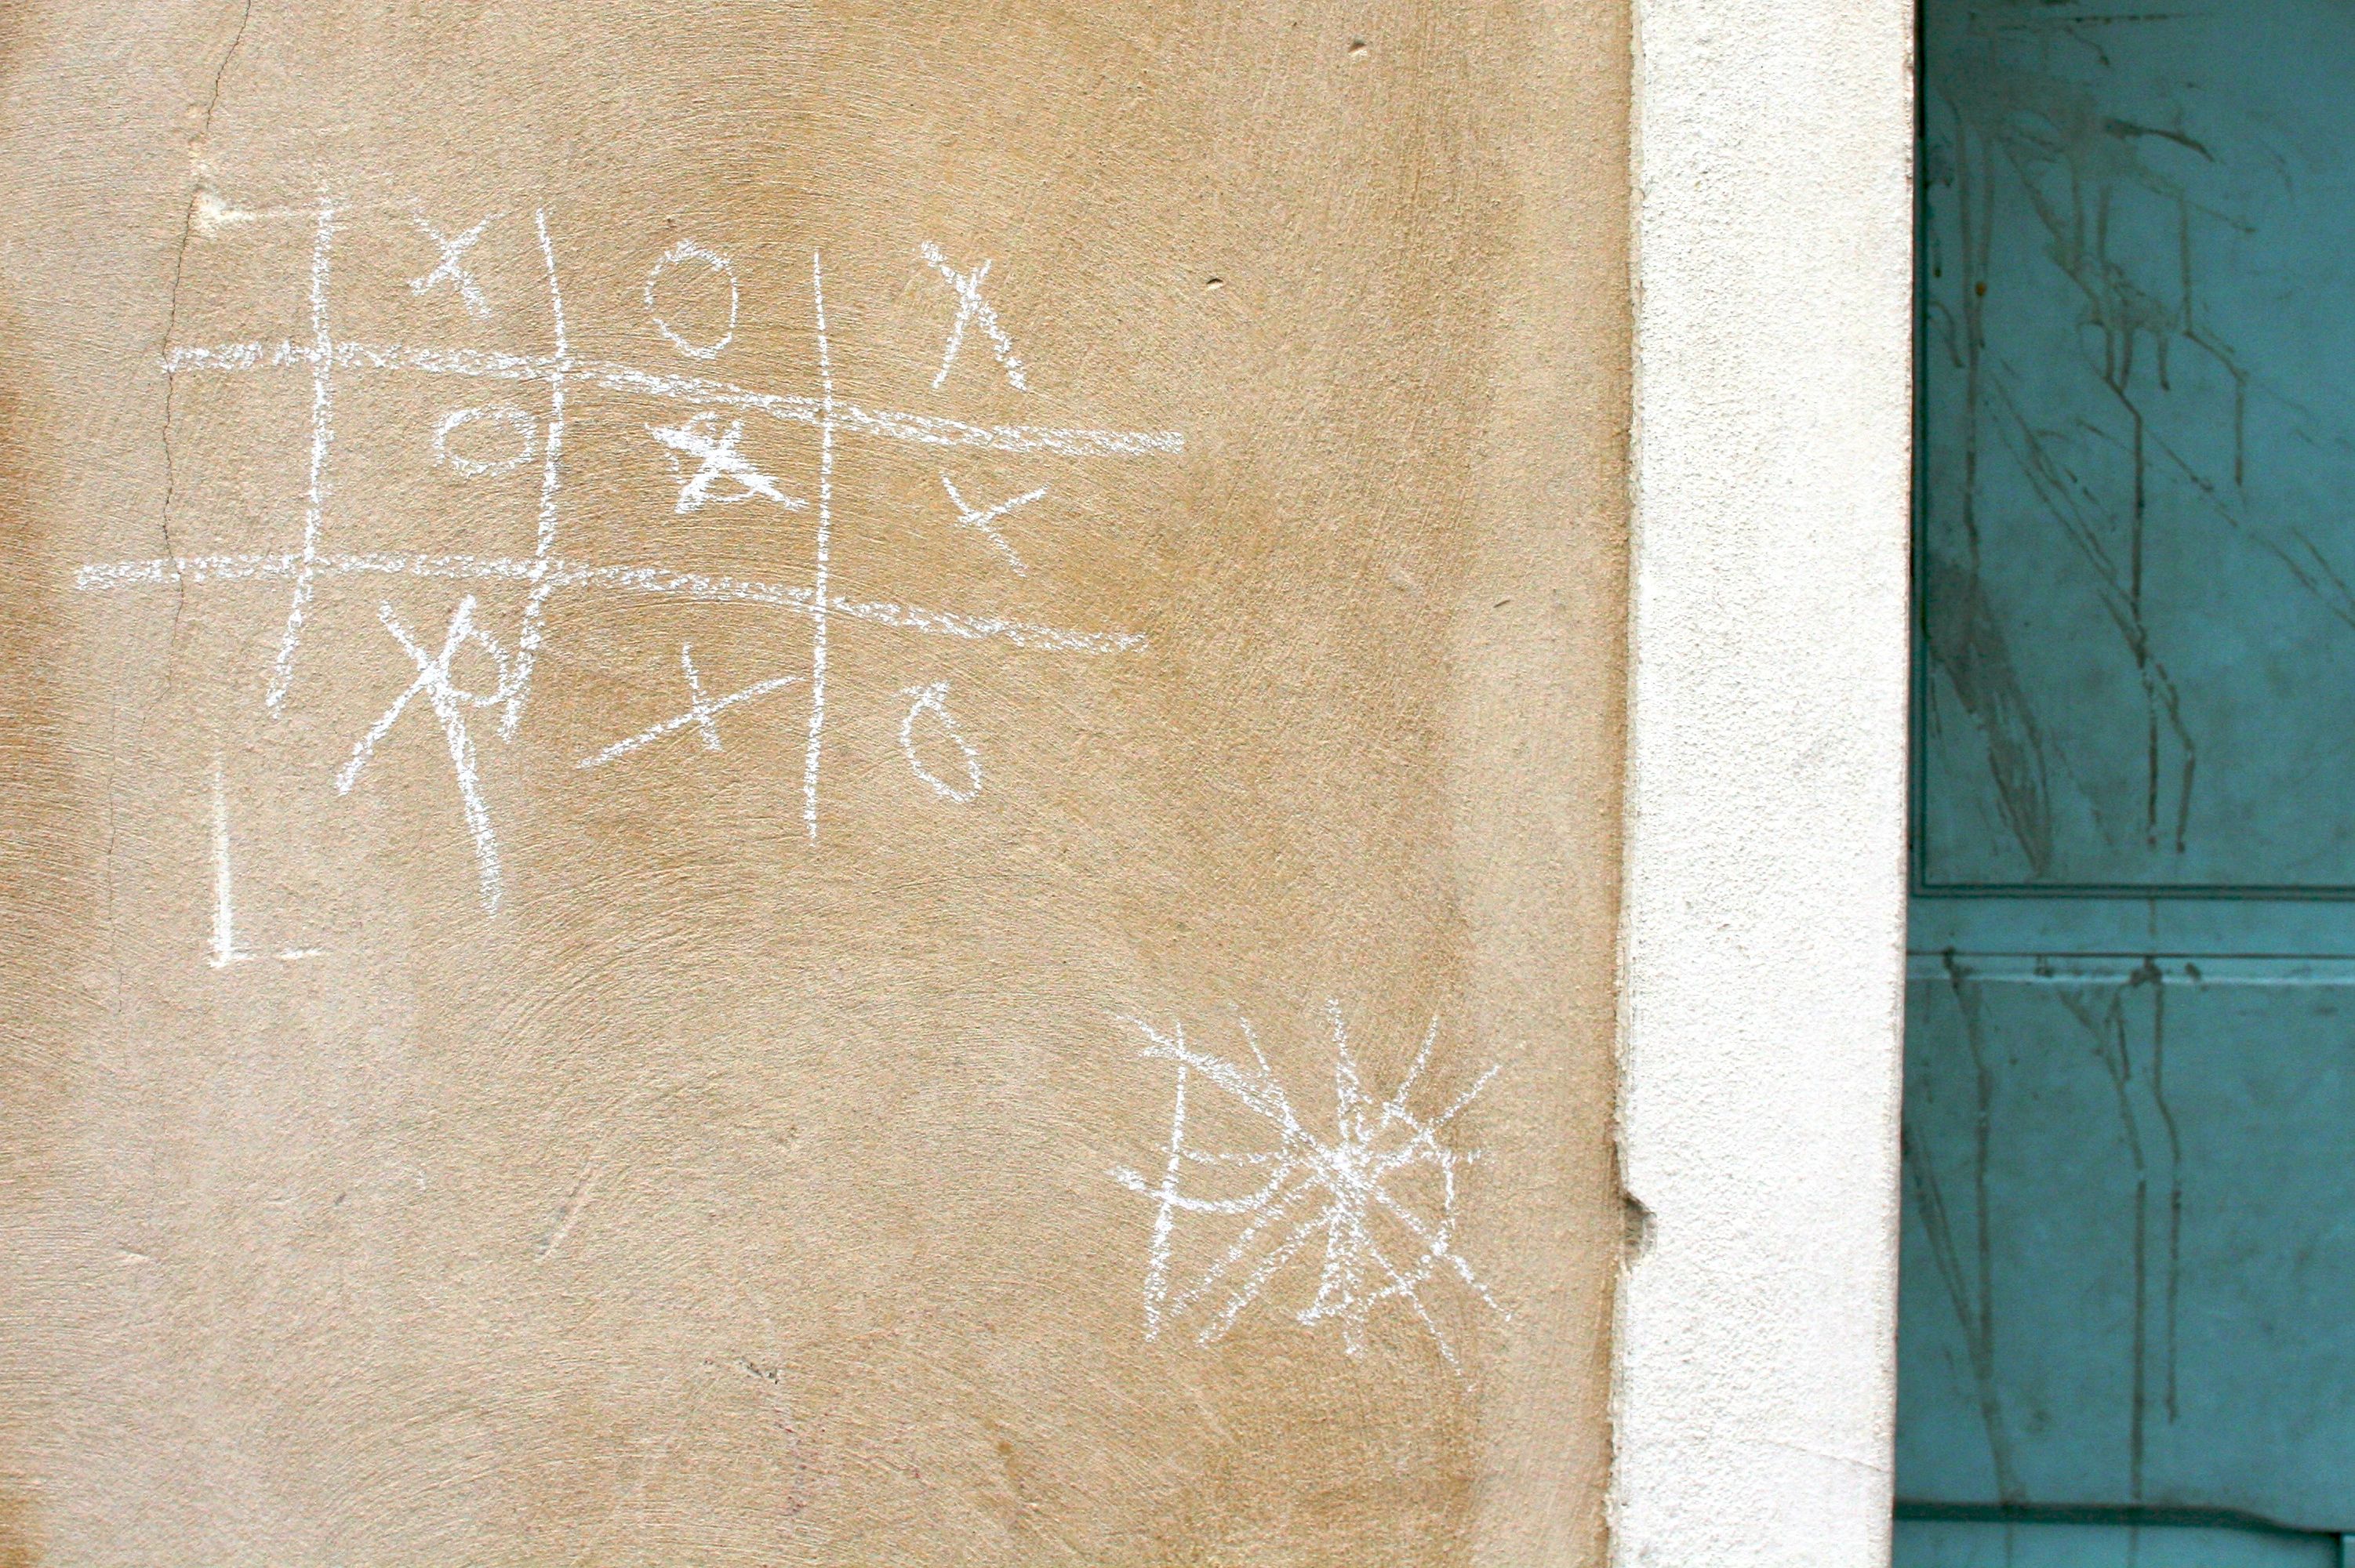 A wall with a completed tic-tac-toe game drawn on it in chalk.